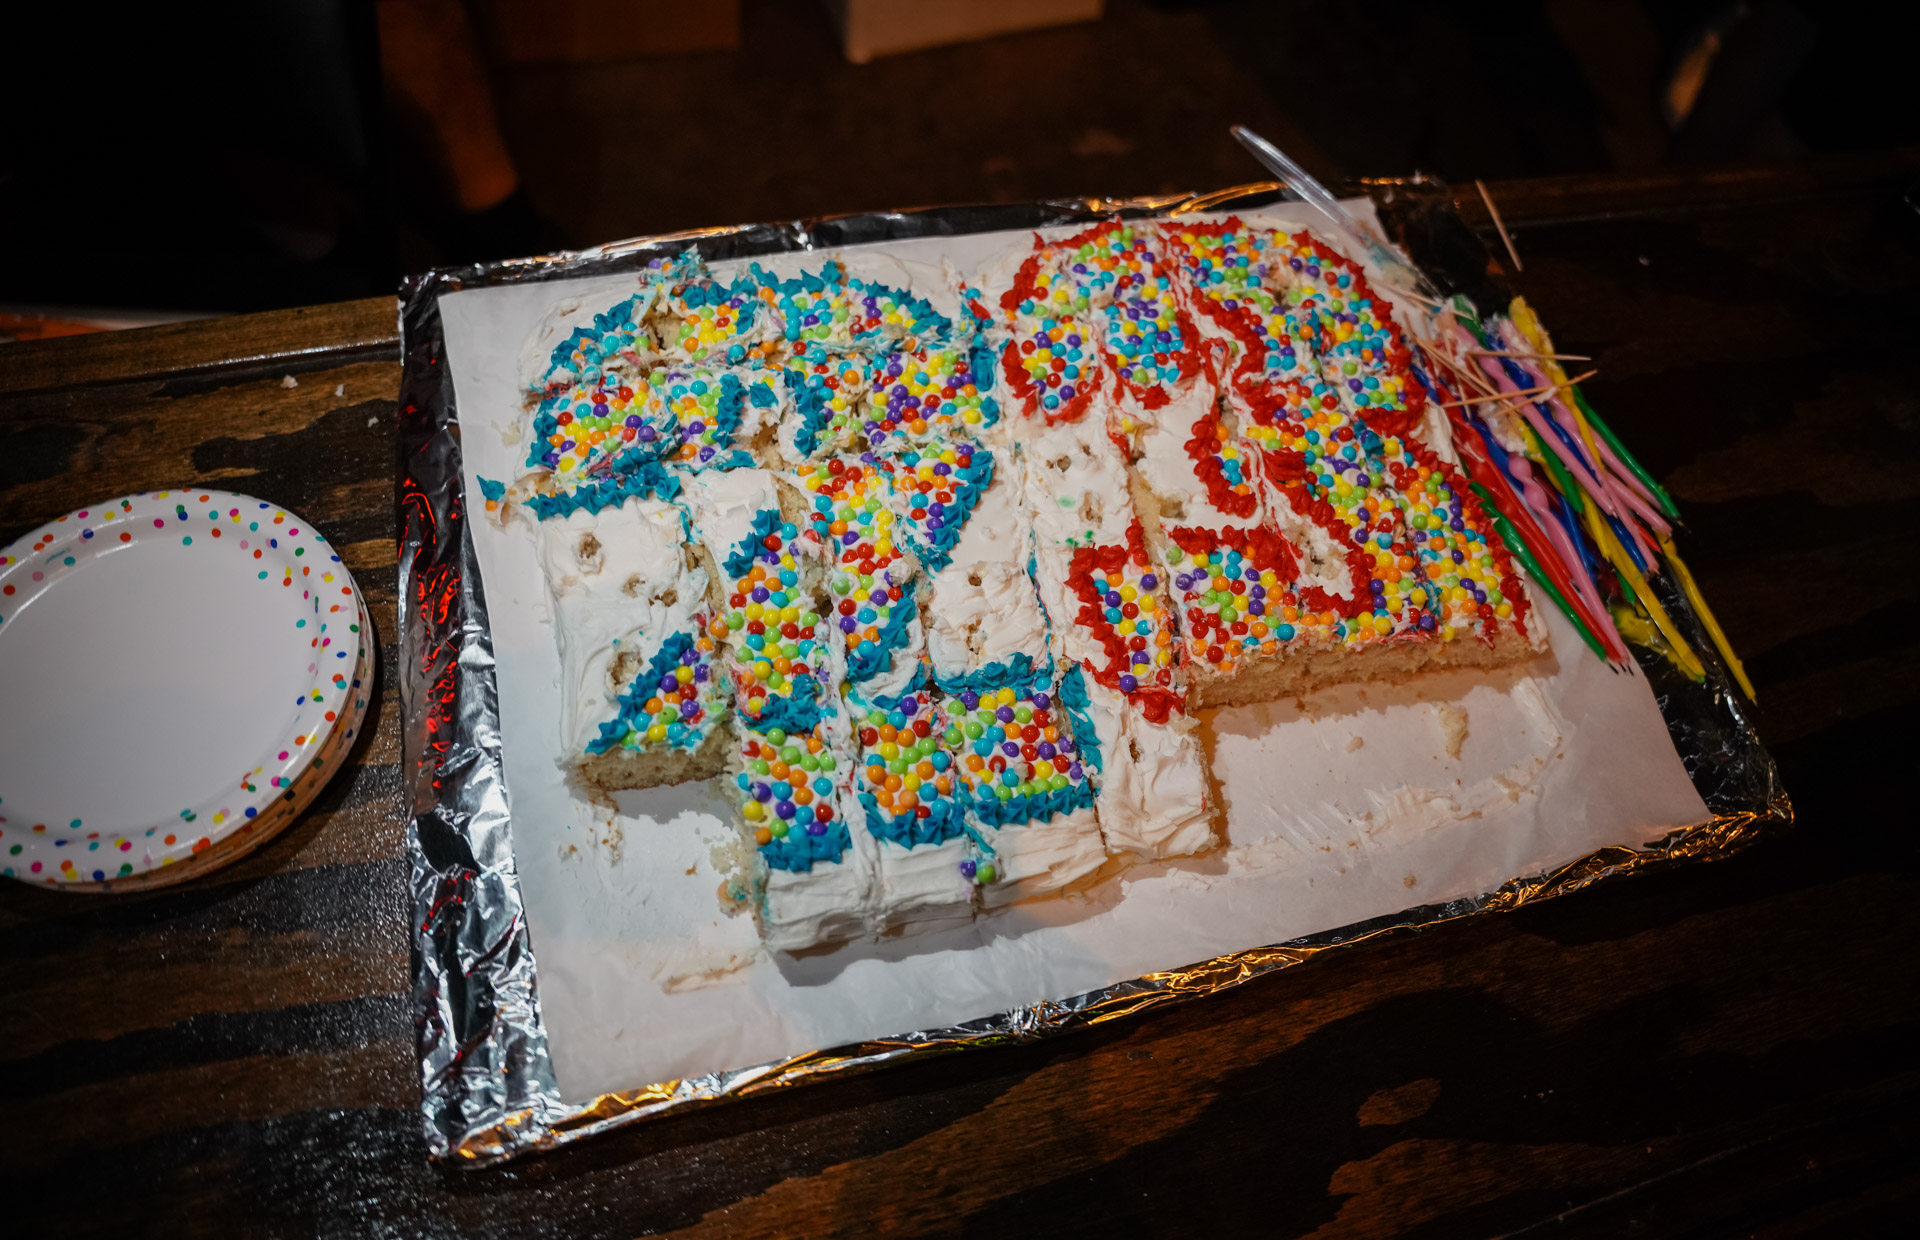 A cake with "23" on it